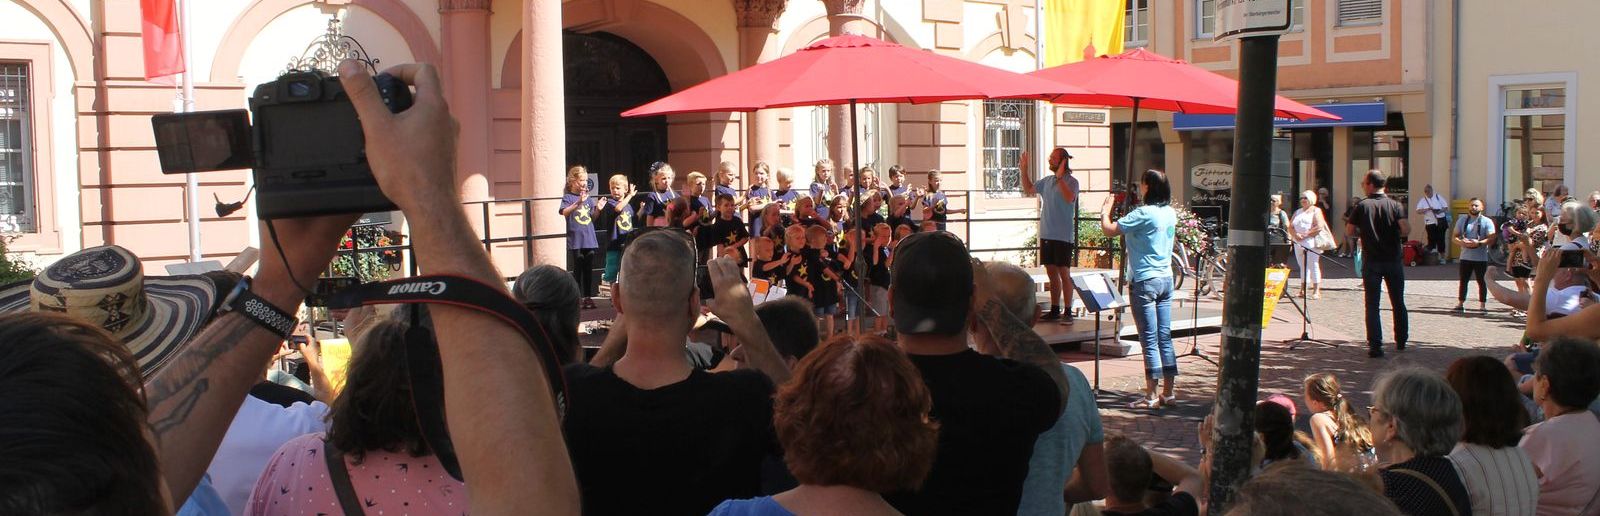 Choir sings in front of the historic town hall in Rastatt, spectators stand around in a circle